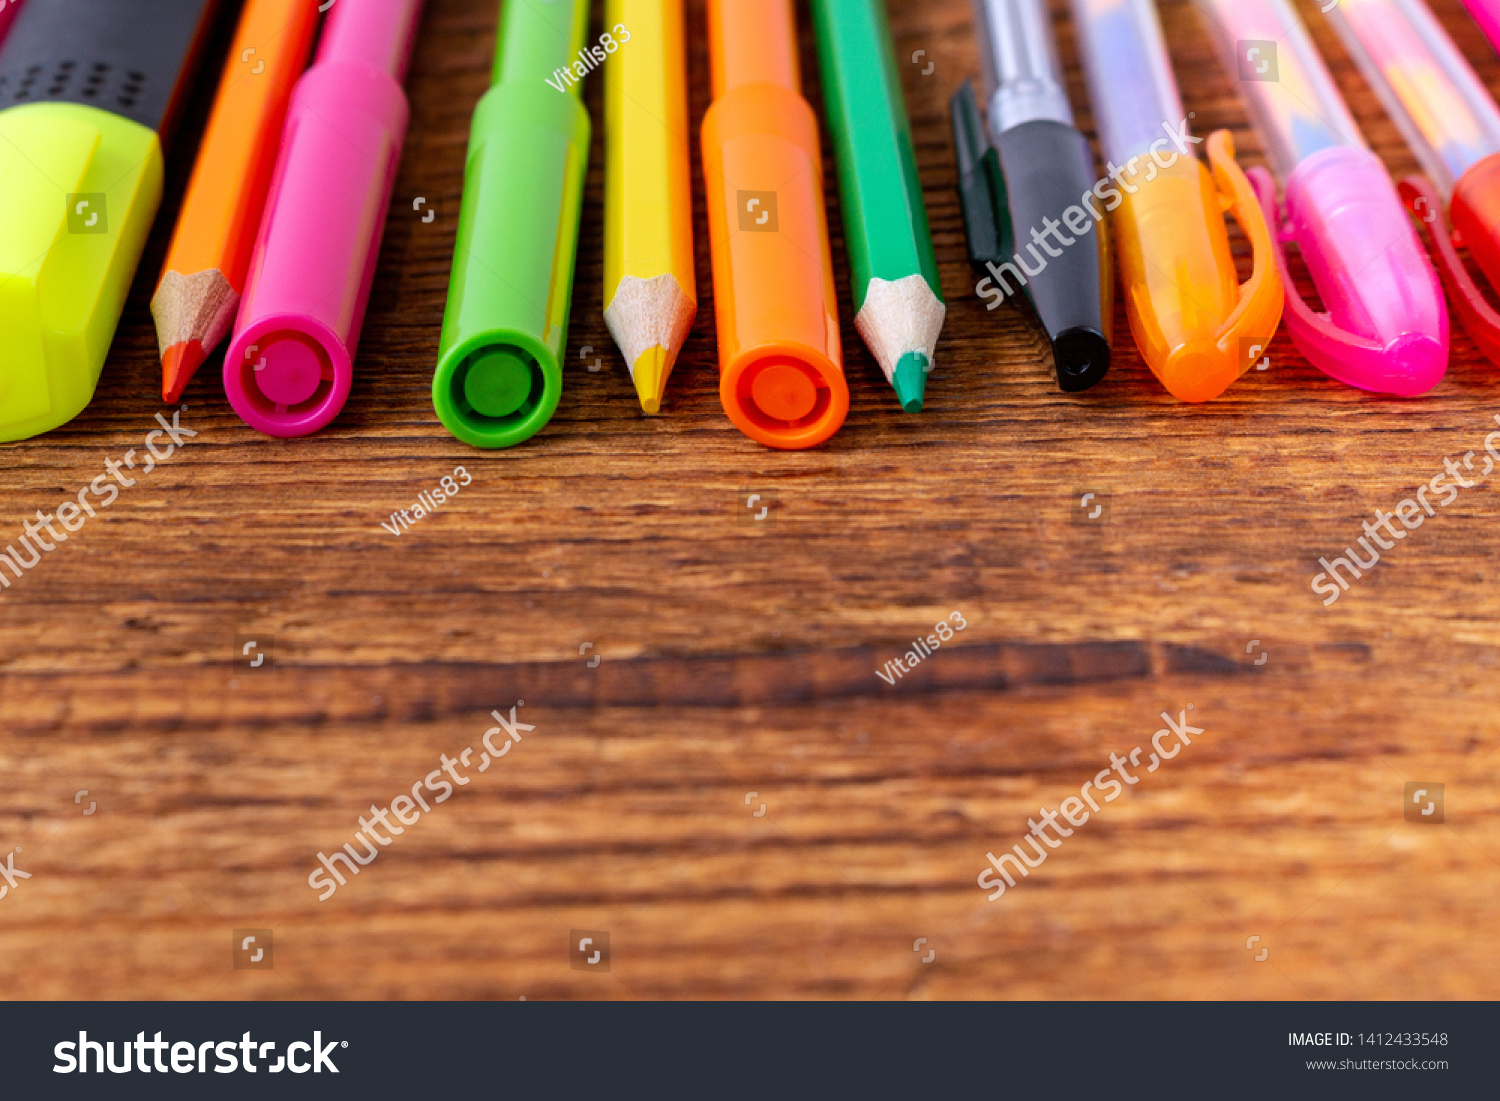 colorful pencils, markers and pens composition mock-up Back to school concept with stationery office supplies on a brown wooden background with copy space close-up #1412433548